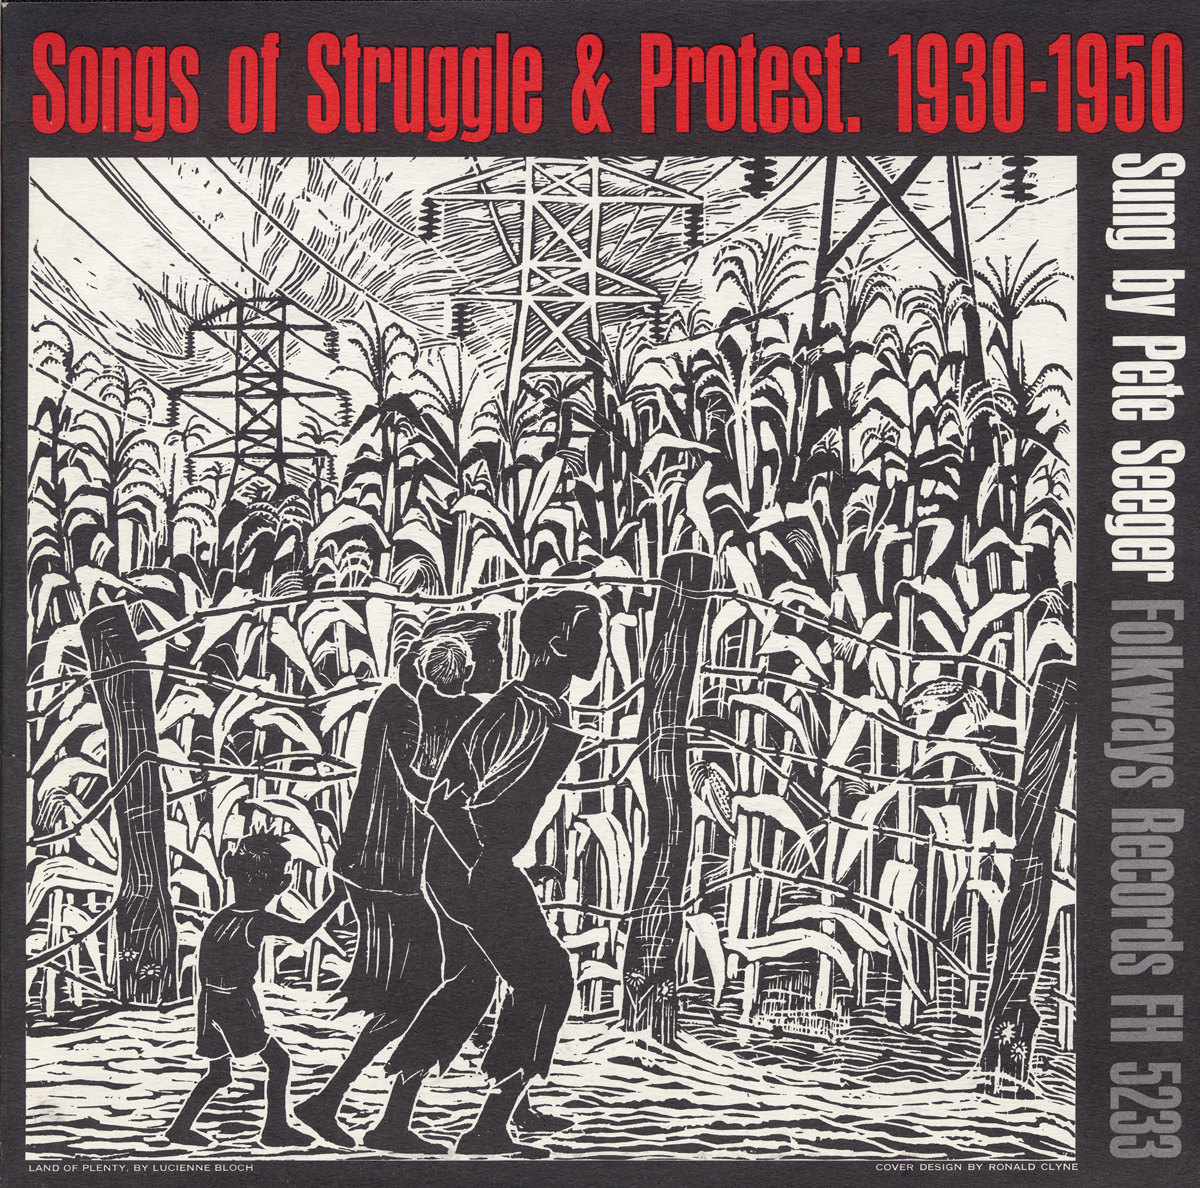 SONGS OF STRUGGLE AND PROTEST, 1930-50